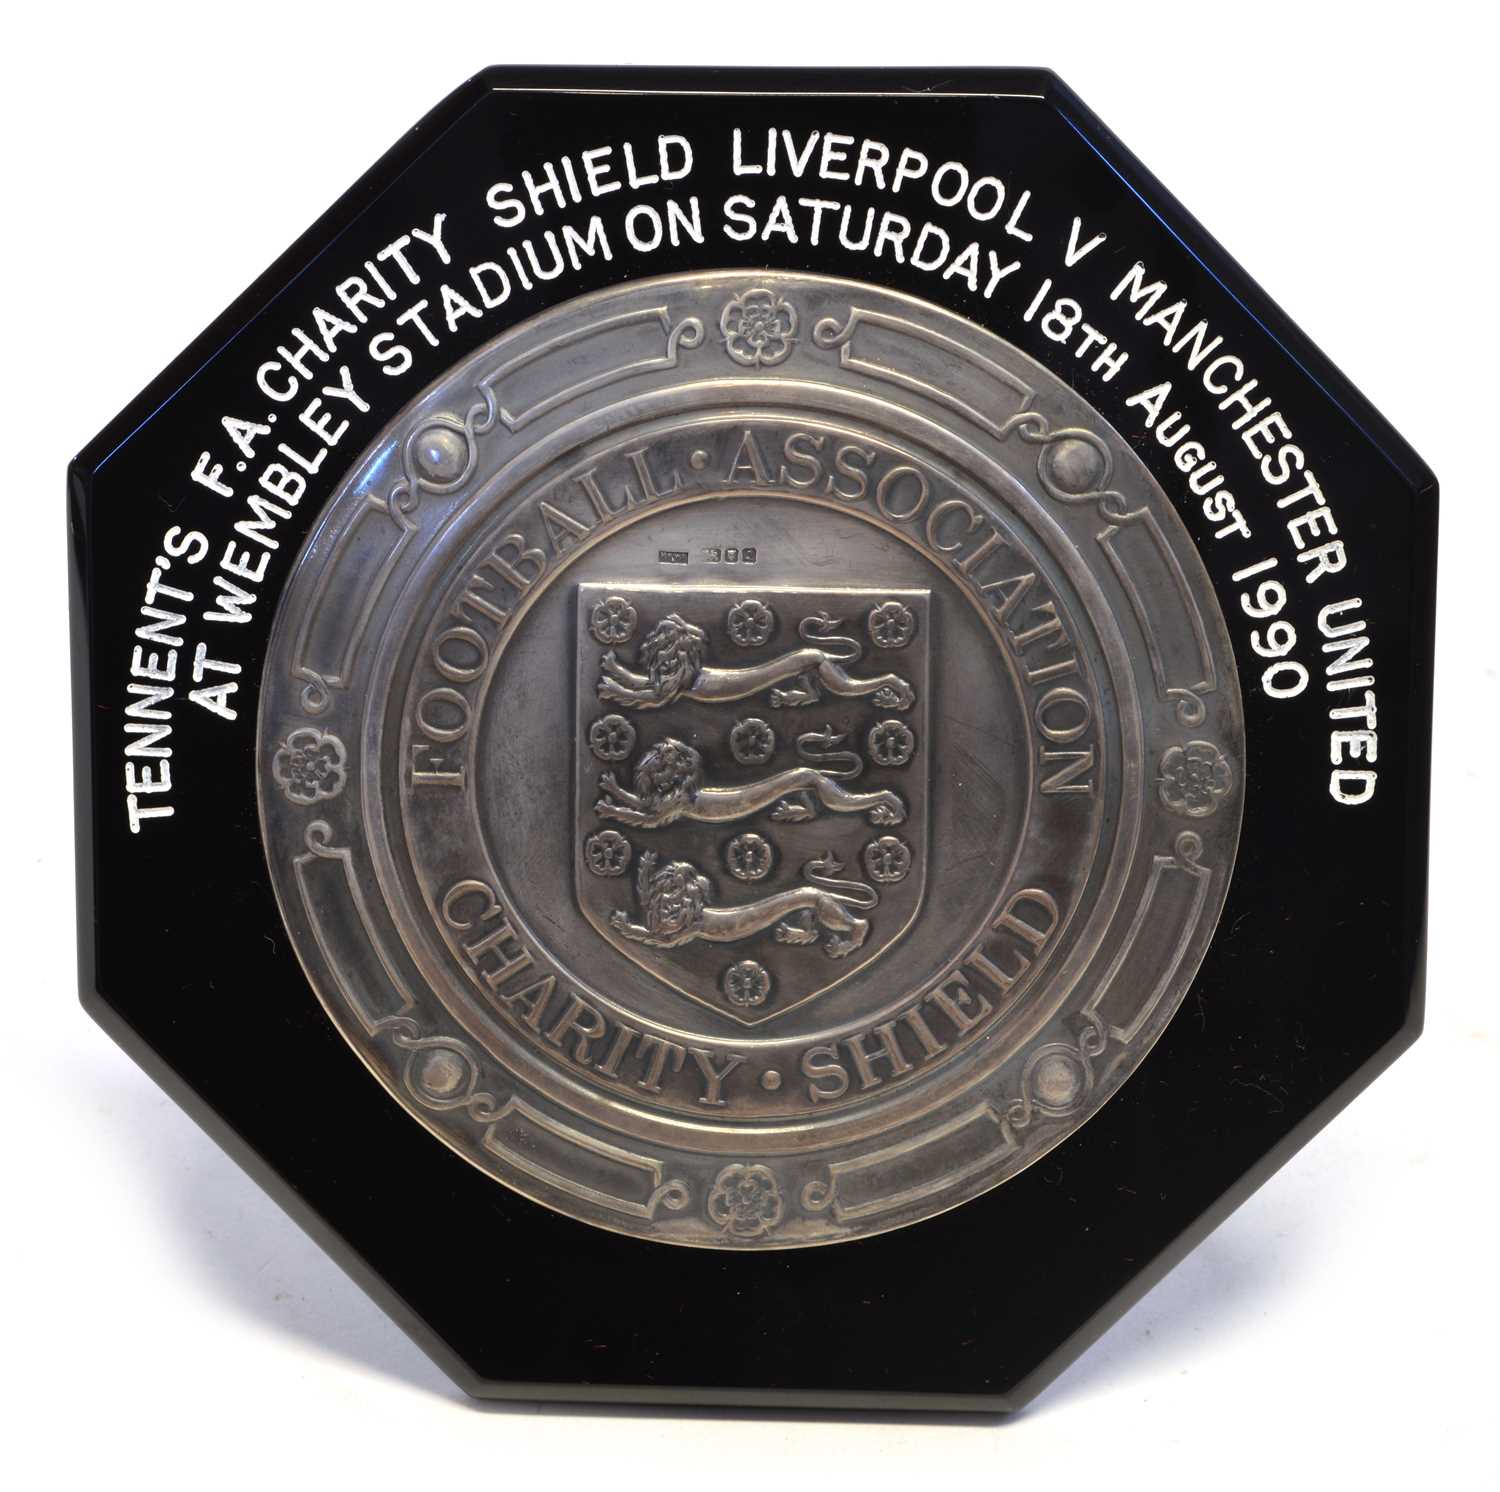 3 - Tennent's FA Charity Shield silver plaque by Mappin & Webb